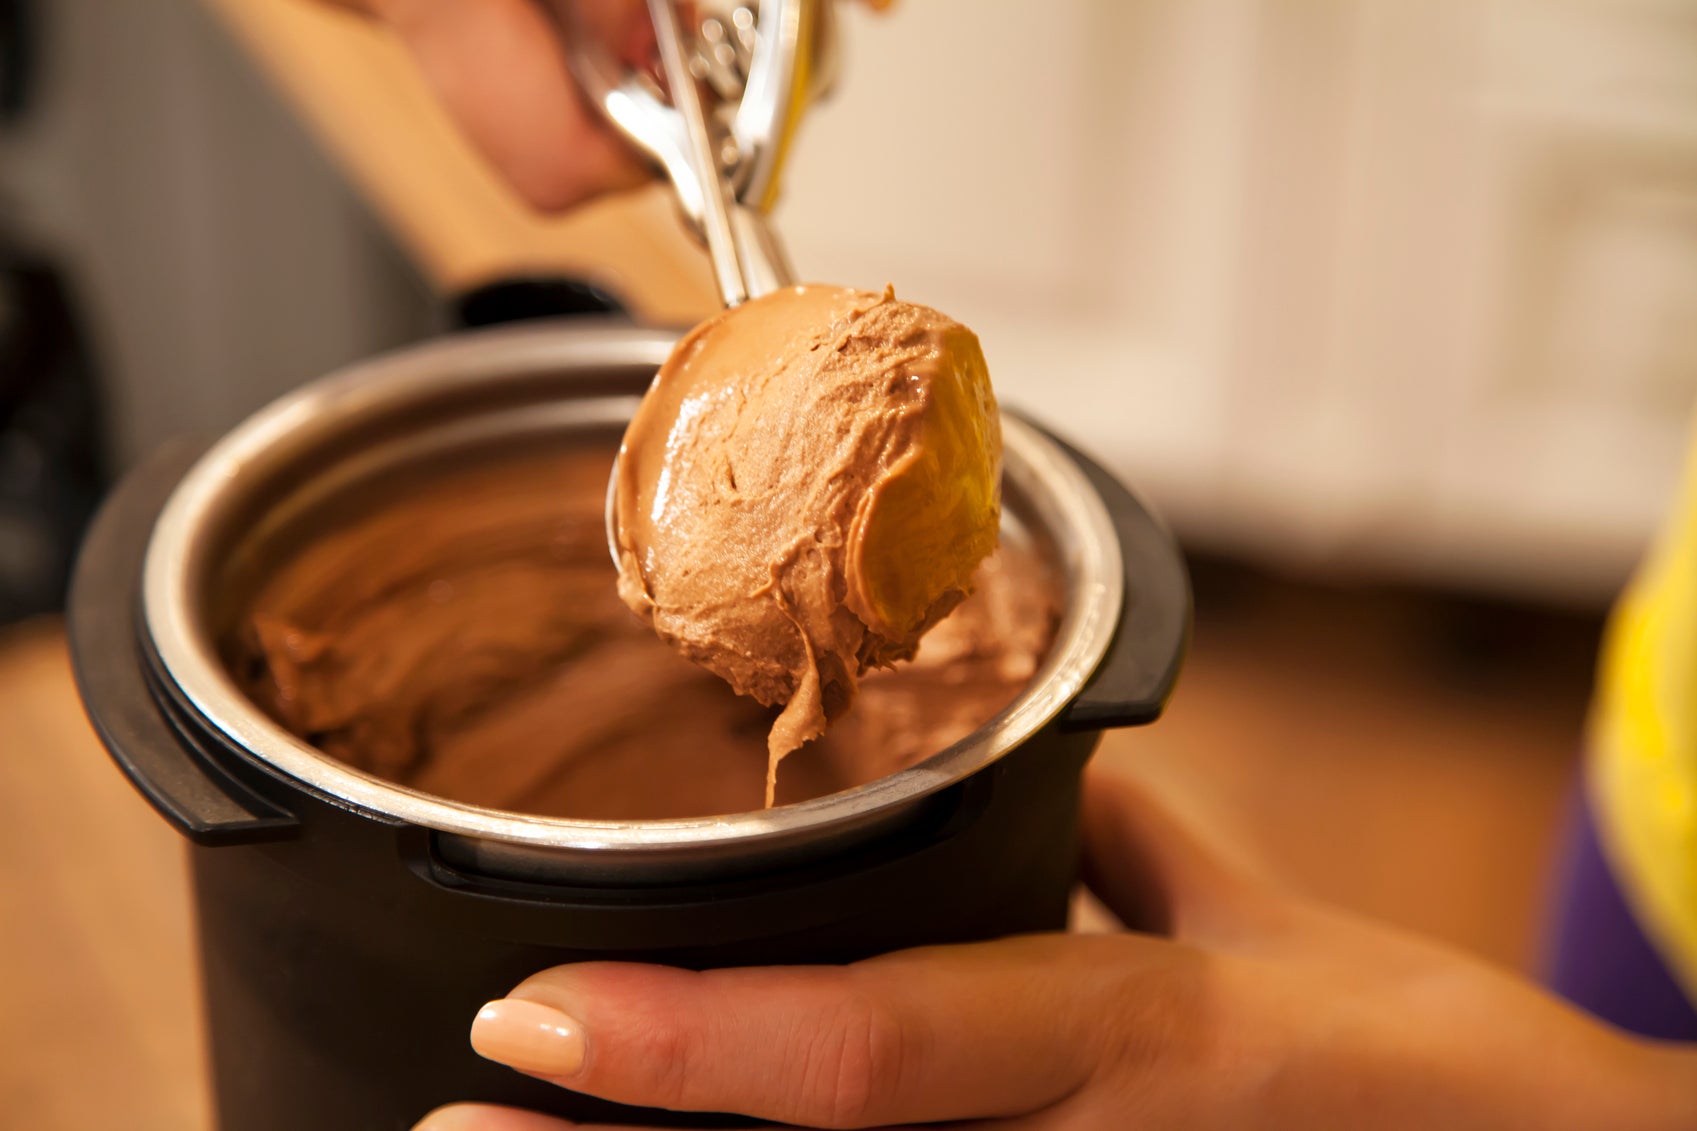 Could gelato actually make you better at sport? One professor seems to think so